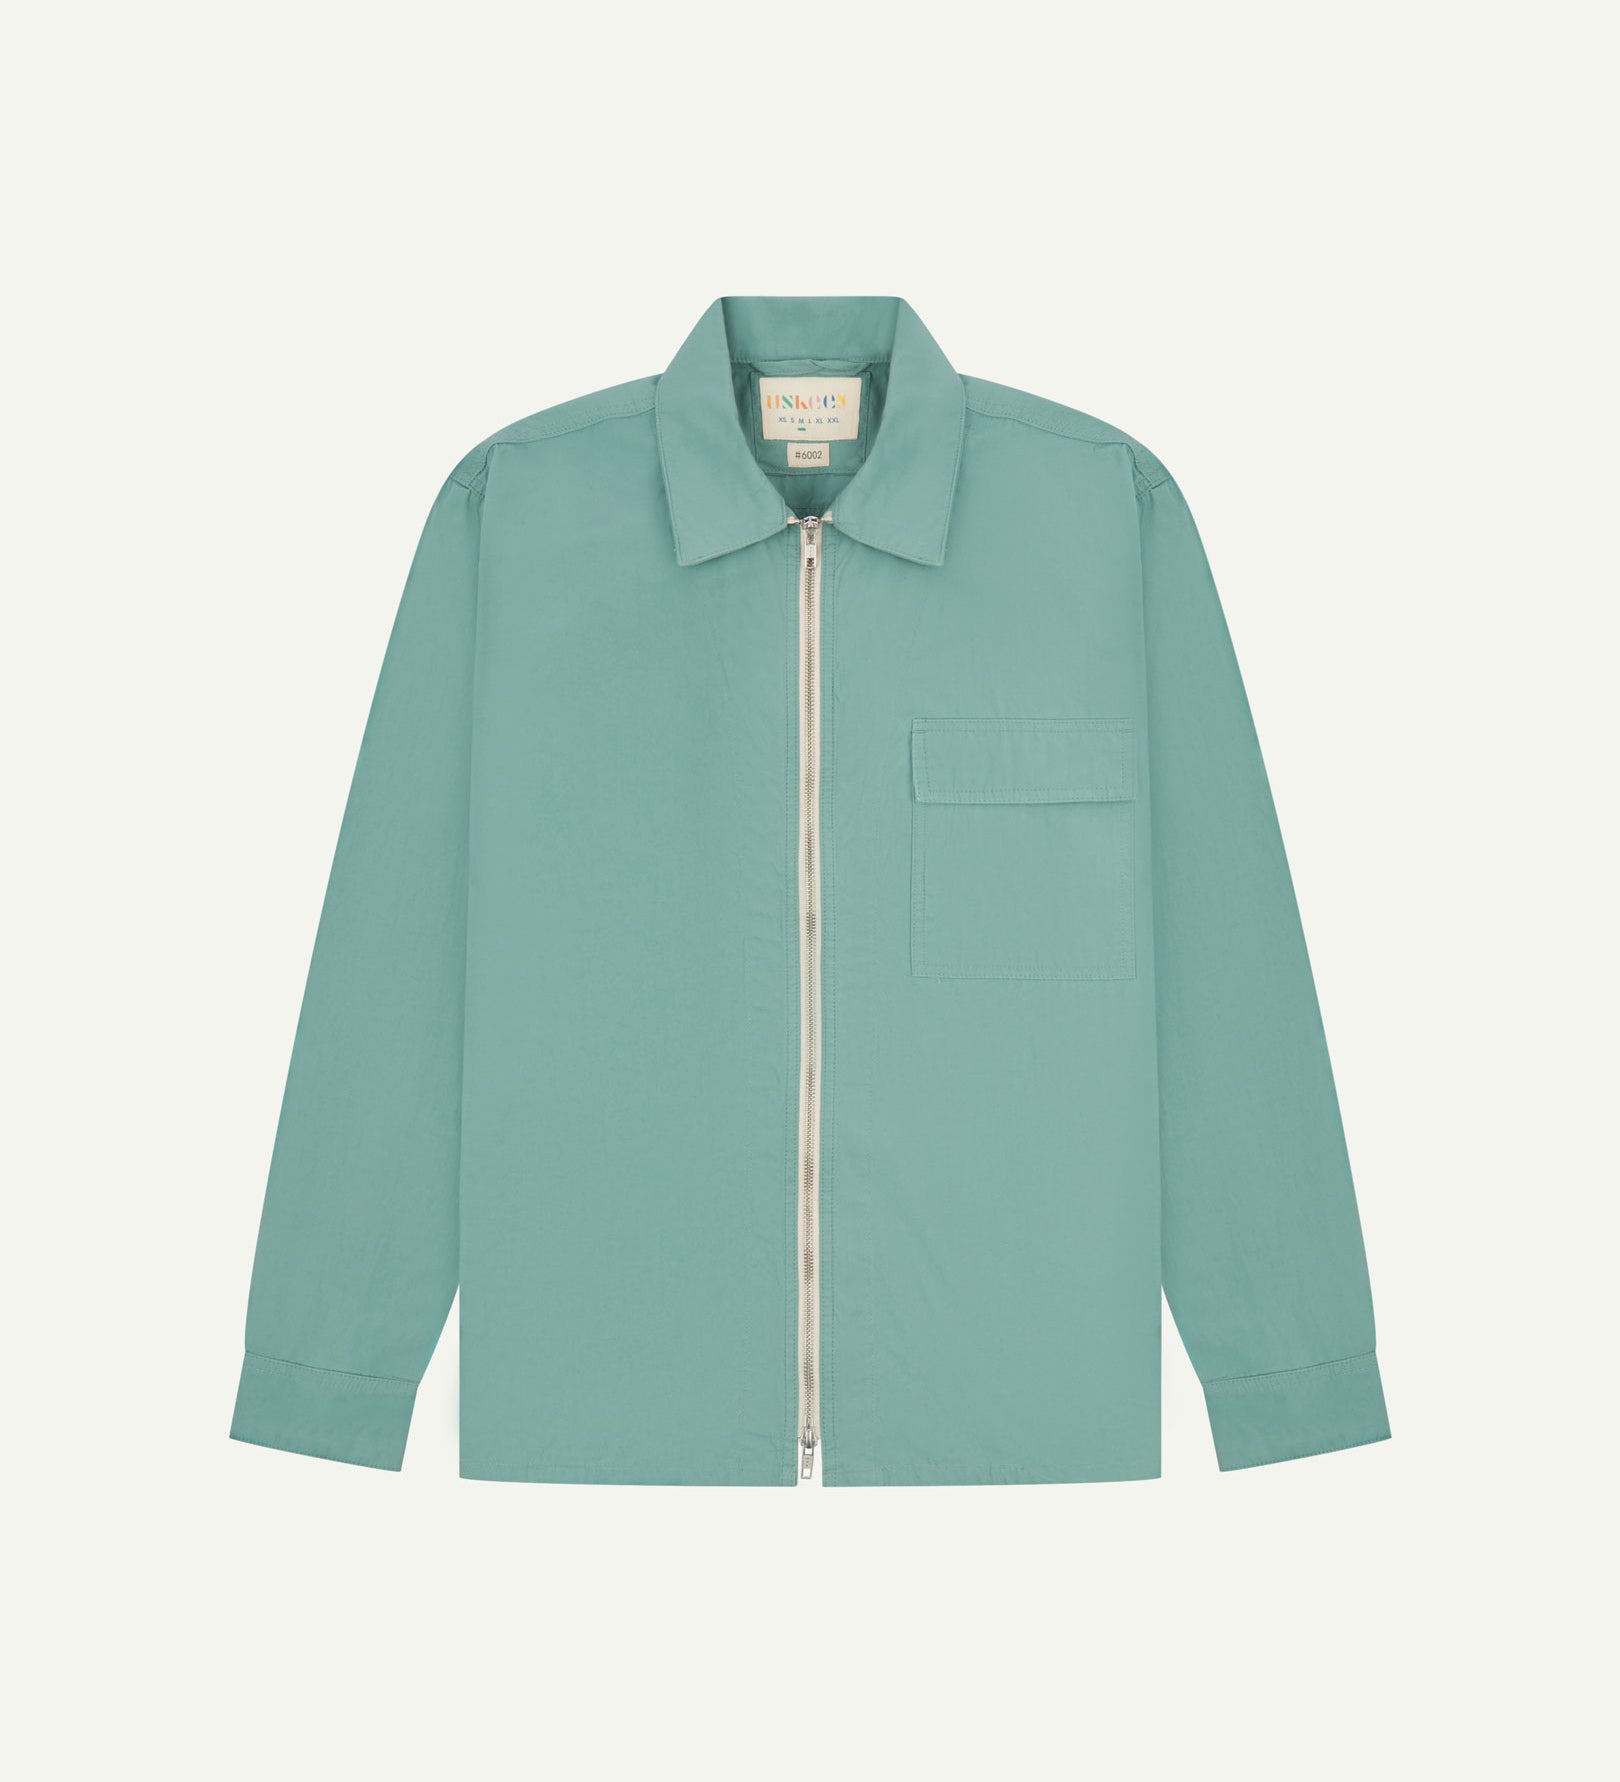 Front flat view of the blue-green 'eucalyptus' coloured, lightweight zip-front jacket. Clear view of zipper, breast pocket and Uskees branding label.